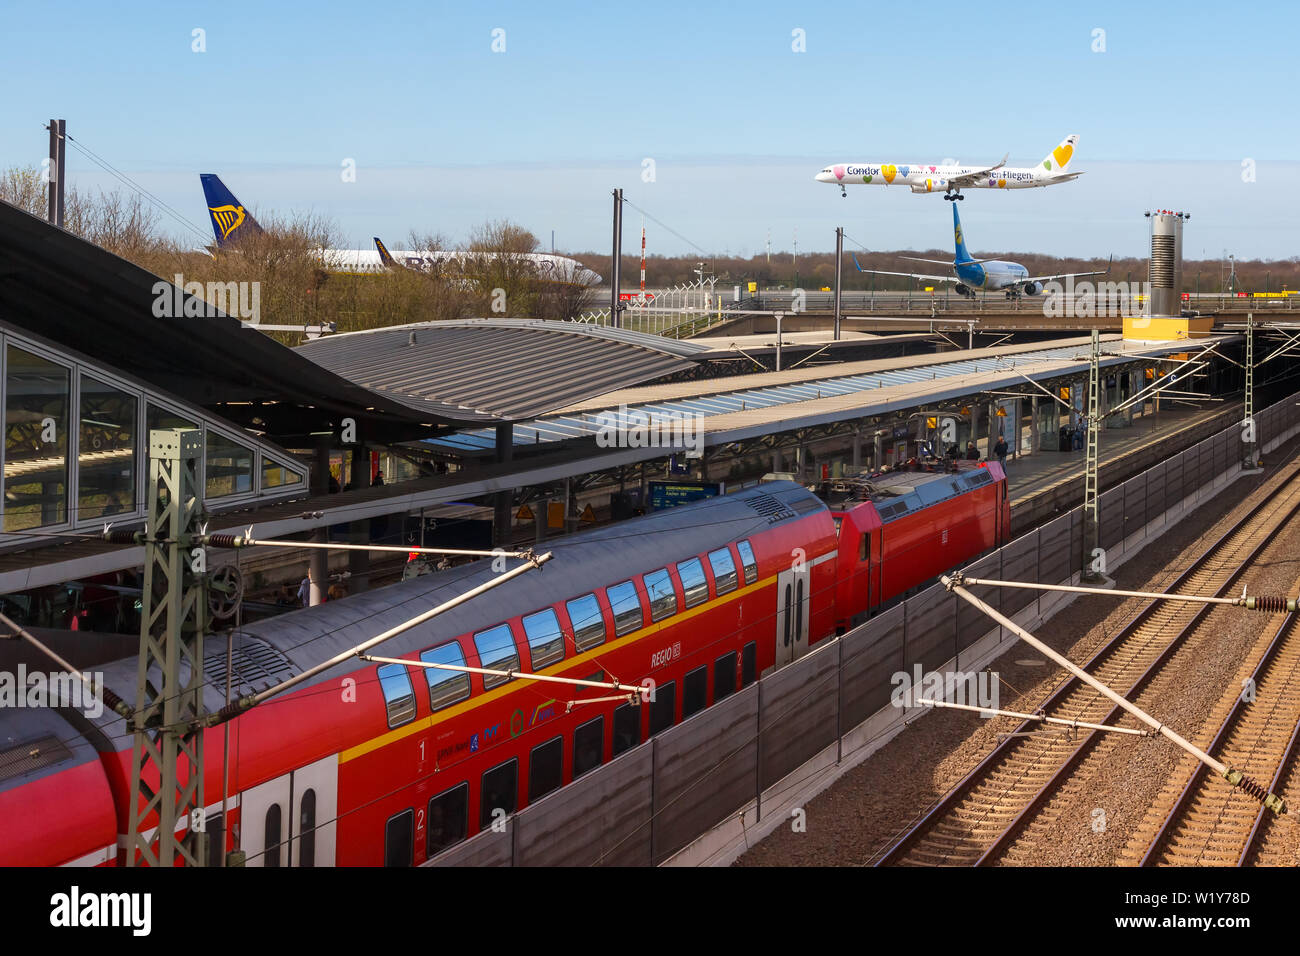 Dusseldorf, Germany – March 24, 2019: Railway station at Dusseldorf Airport (DUS) in Germany. Stock Photo